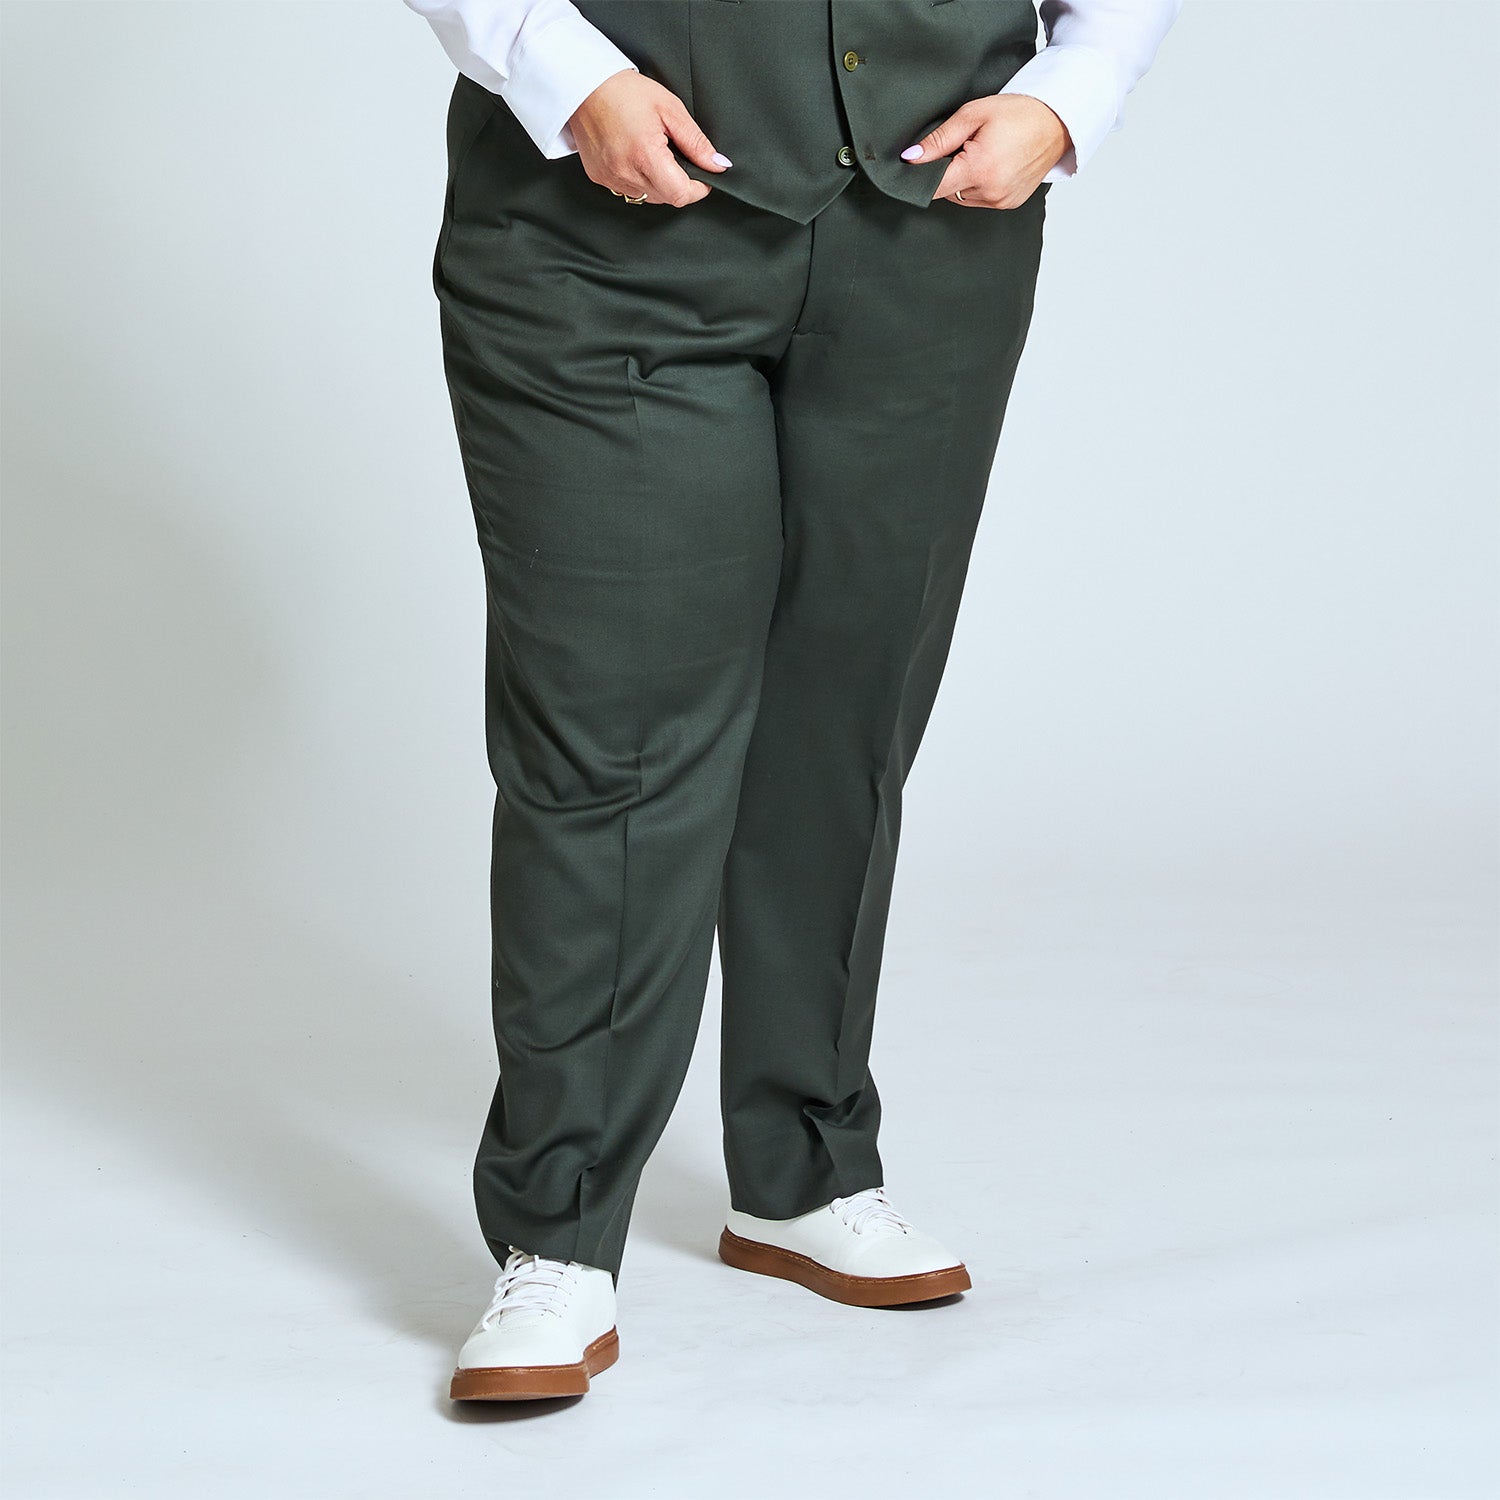 What Goes With Dark Green Pants | lupon.gov.ph